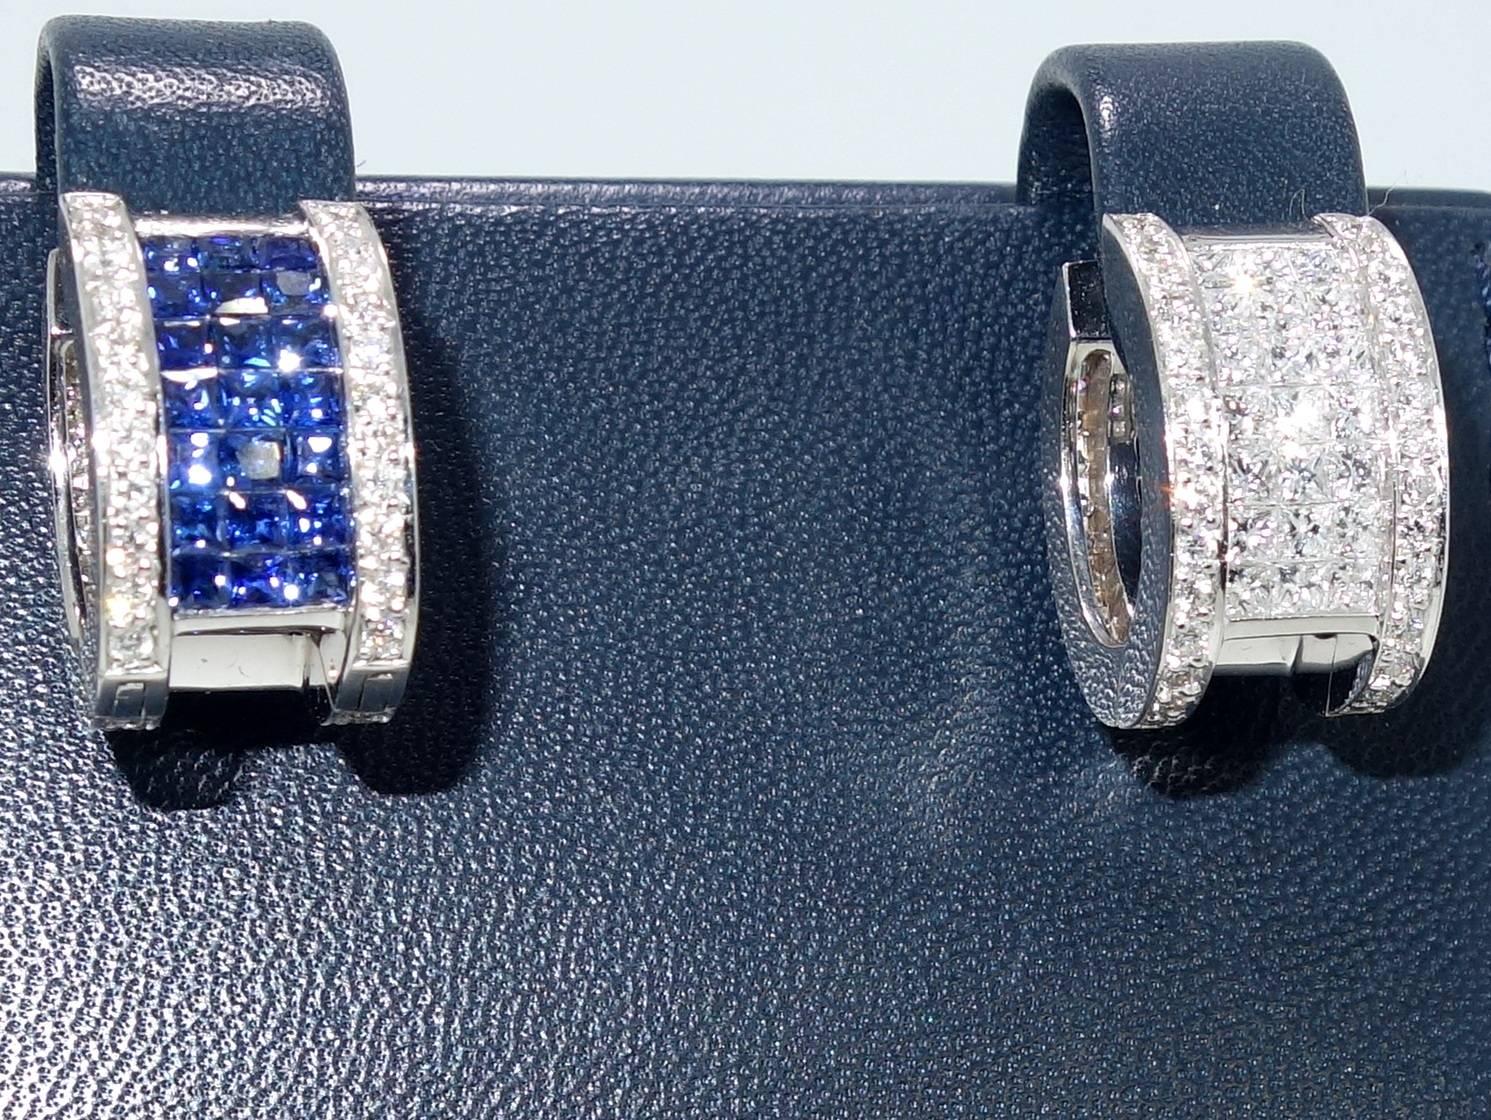 These earrings have approximately 3.15 cts. of fine diamonds - both round modern brilliants and square cut diamonds.  The square cut diamonds are invisibly set.  These diamonds are near colorless (H) and very slightly included (VS) in clarity.  The